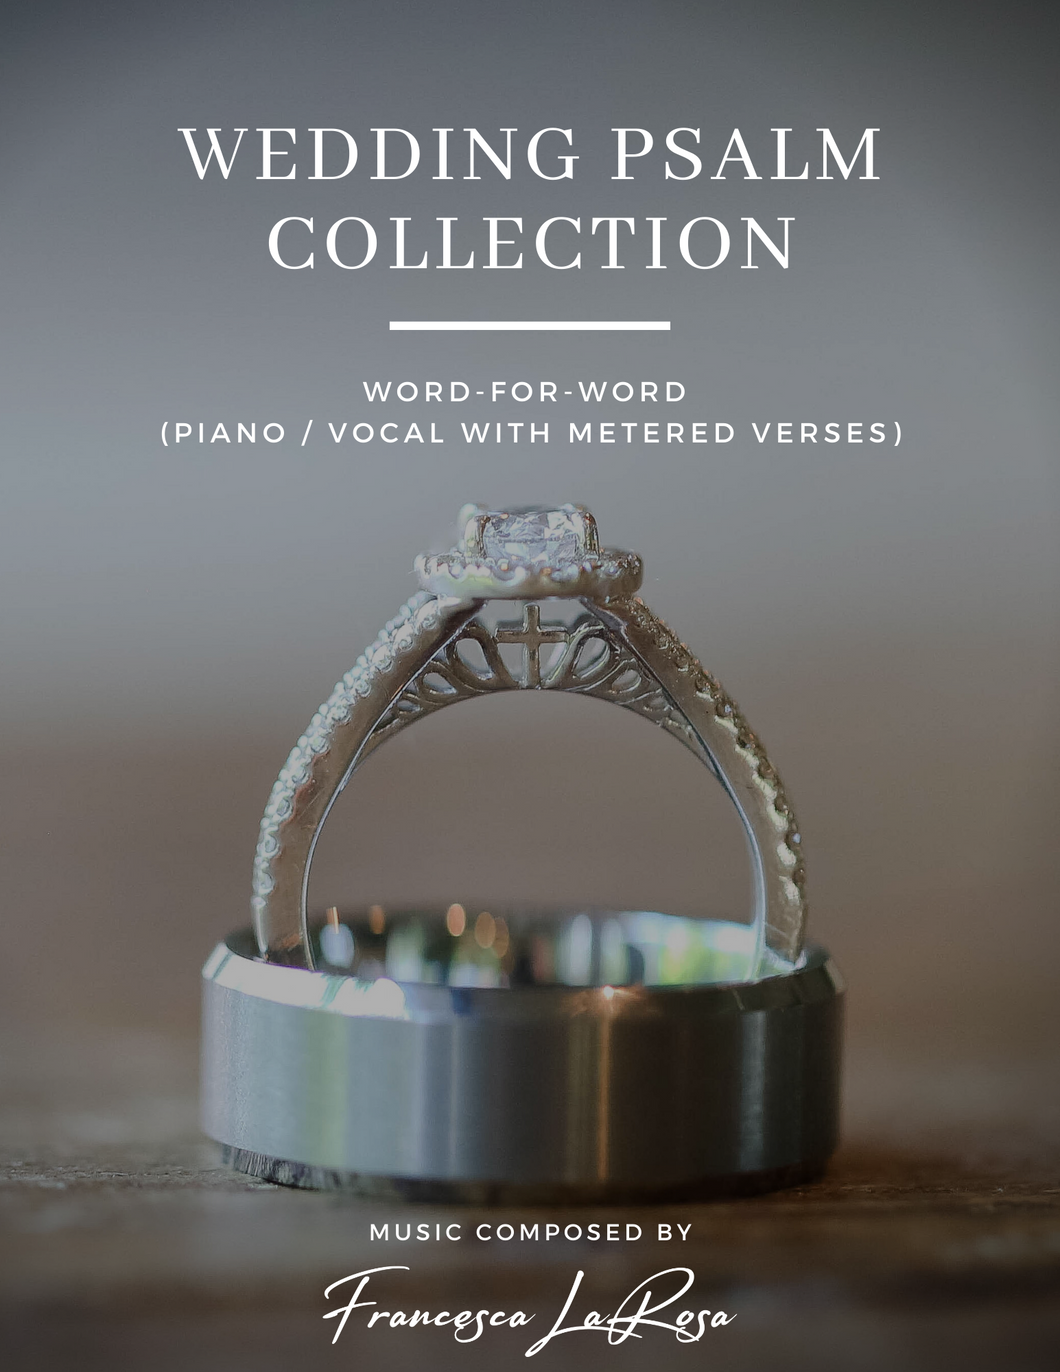 The Complete Wedding Psalm Collection (Piano / Vocal Metered Verses)